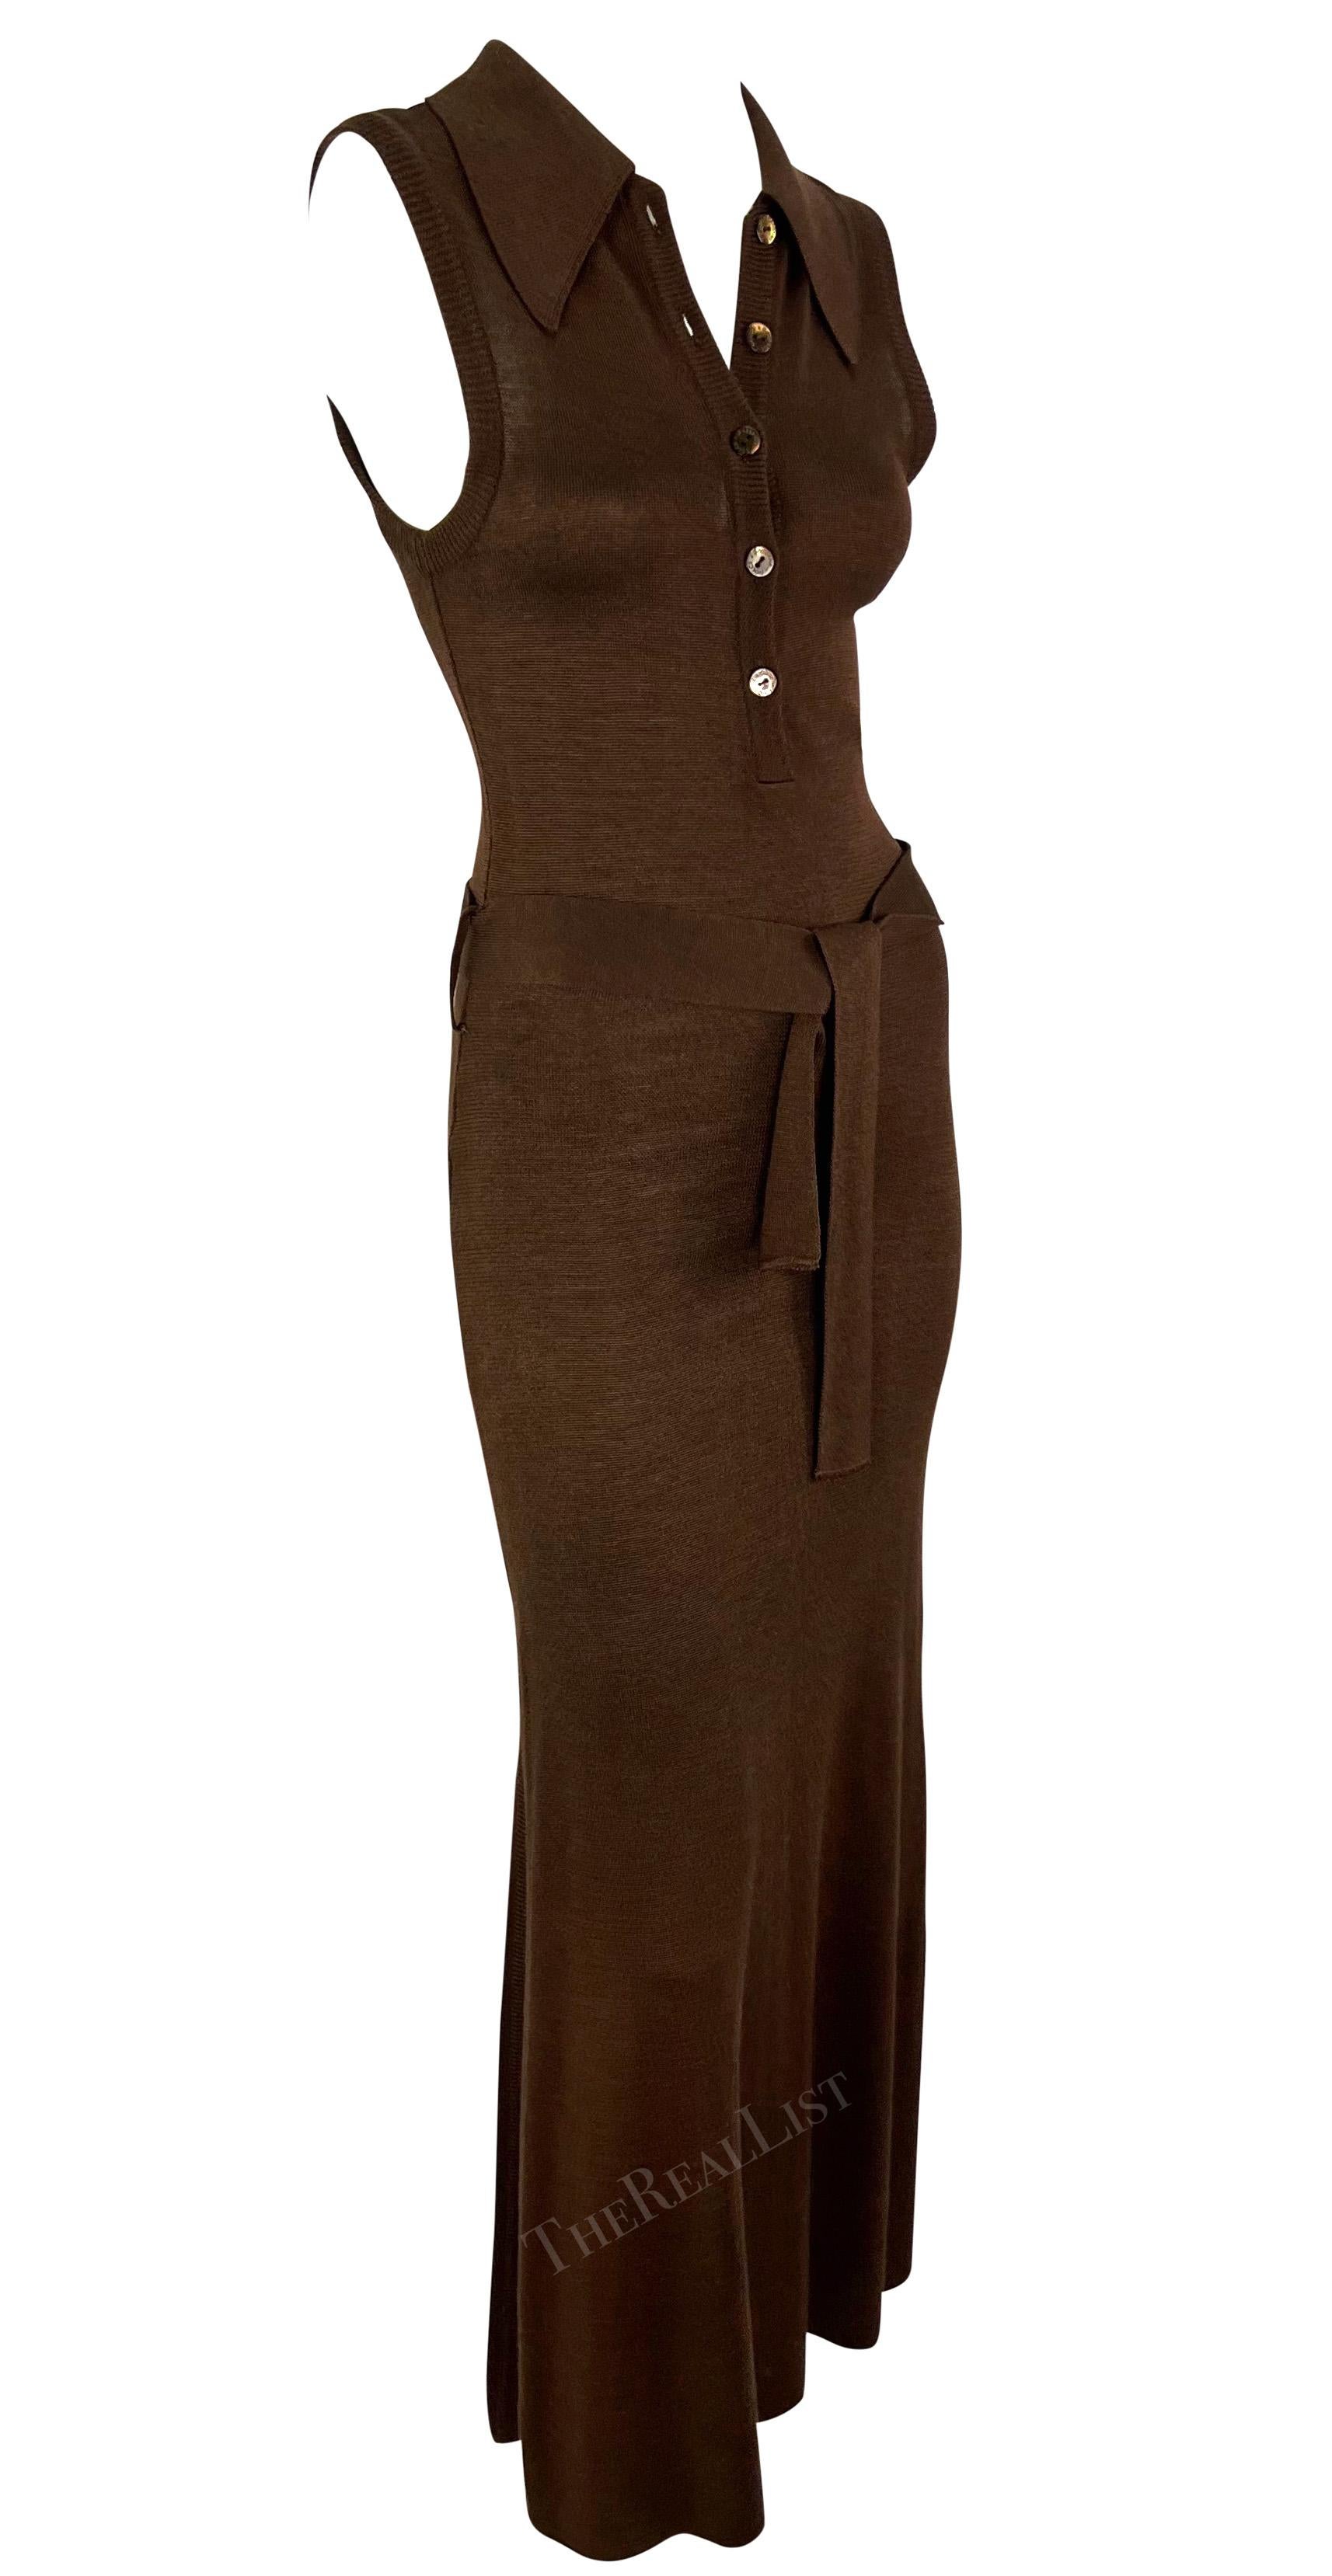 S/S 1996 Dolce & Gabbana Runway Brown Knit Bodycon Belted Maxi Collared Dress For Sale 3